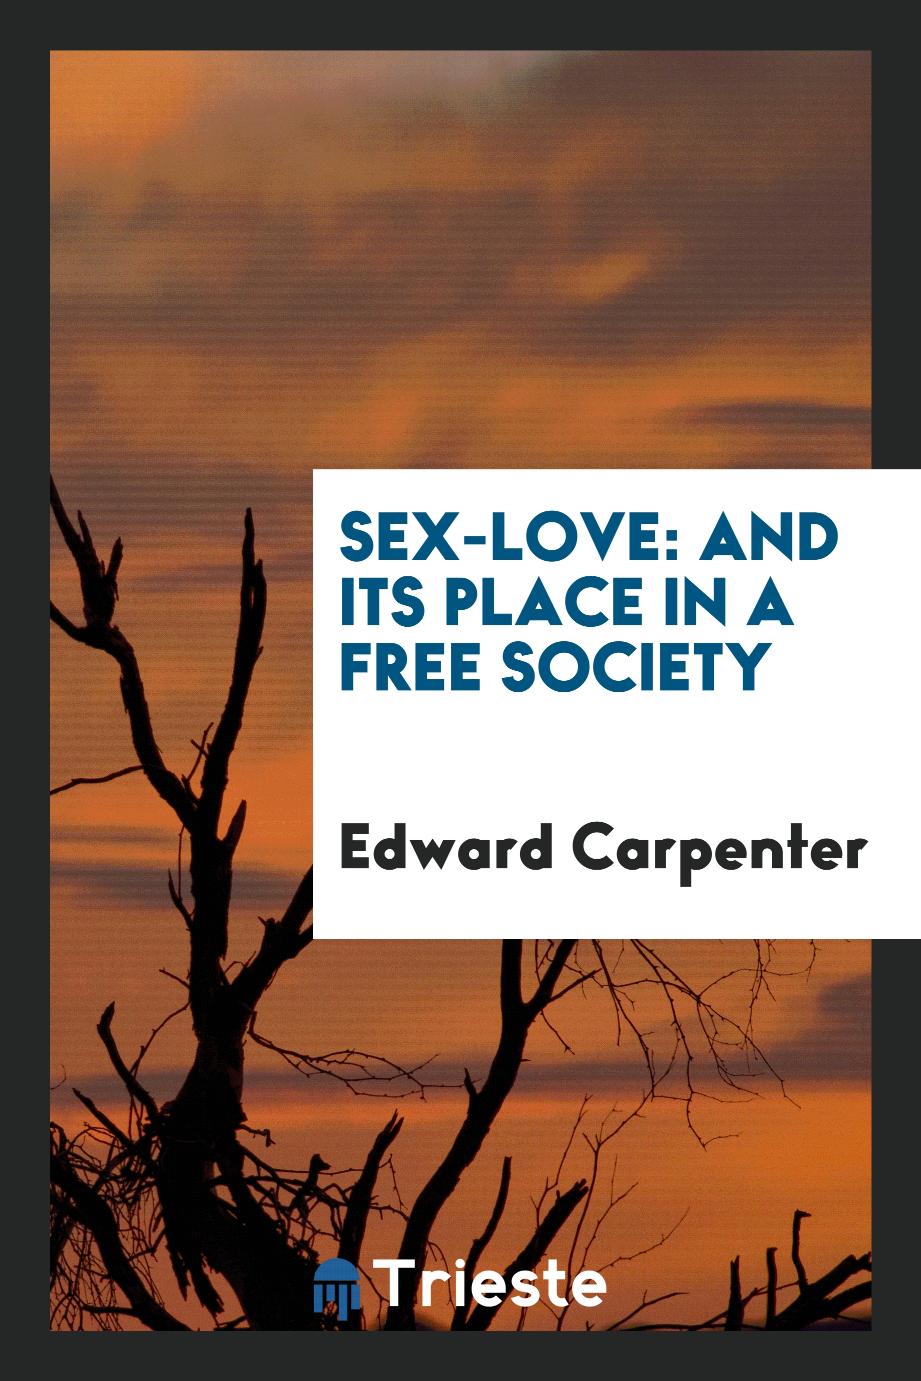 Sex-love: And Its Place in a Free Society